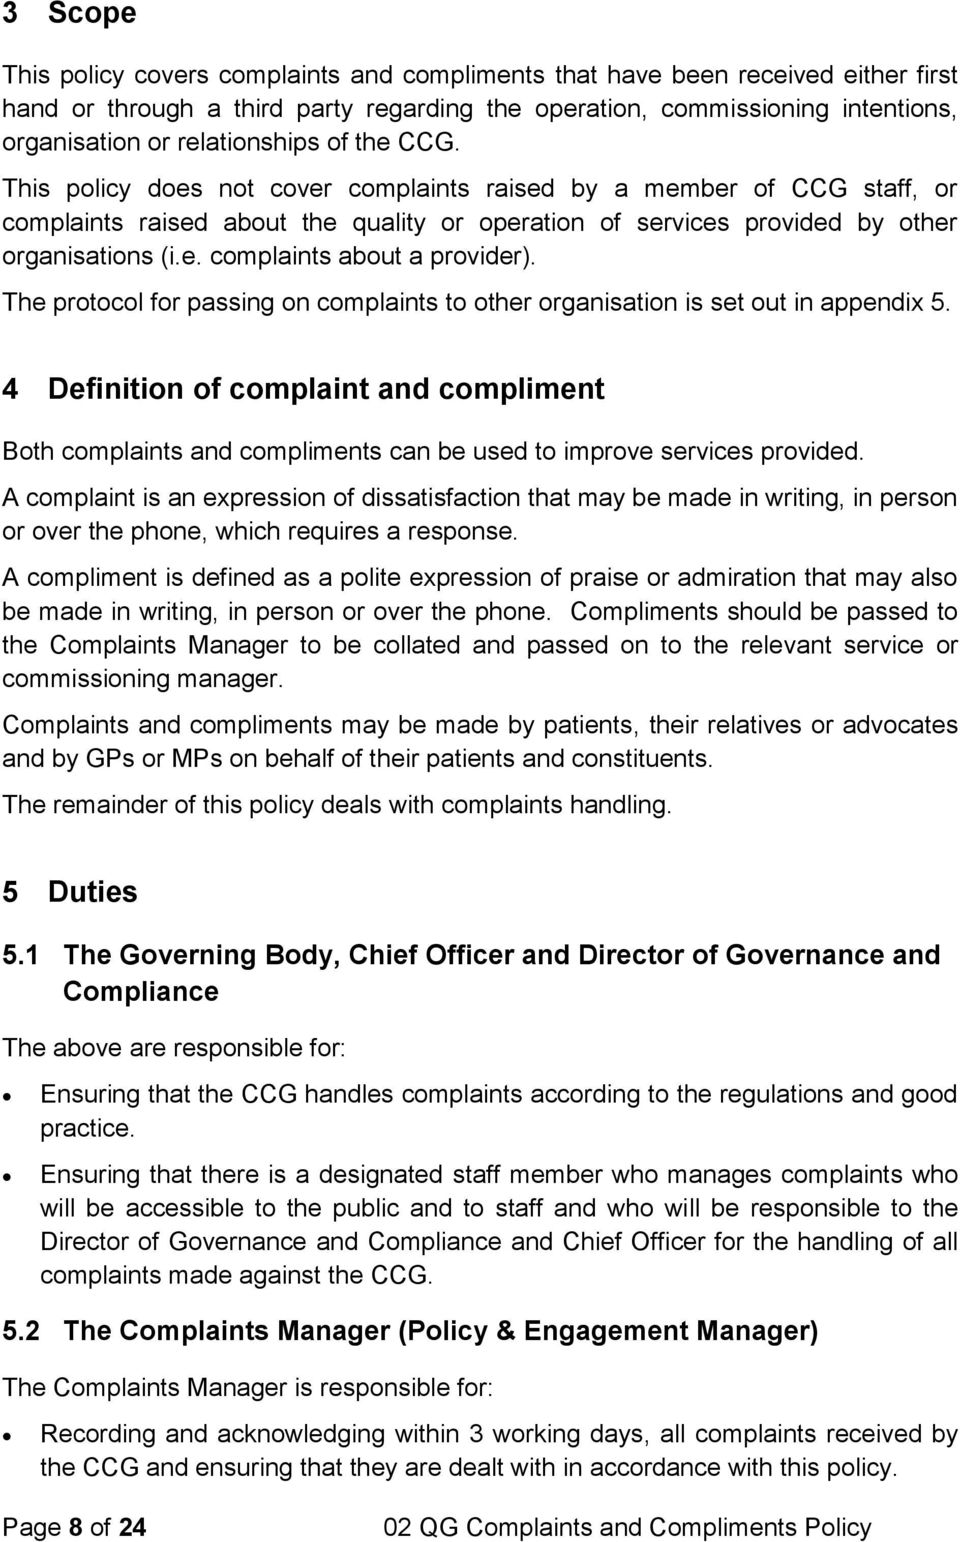 The protocol for passing on complaints to other organisation is set out in appendix 5.